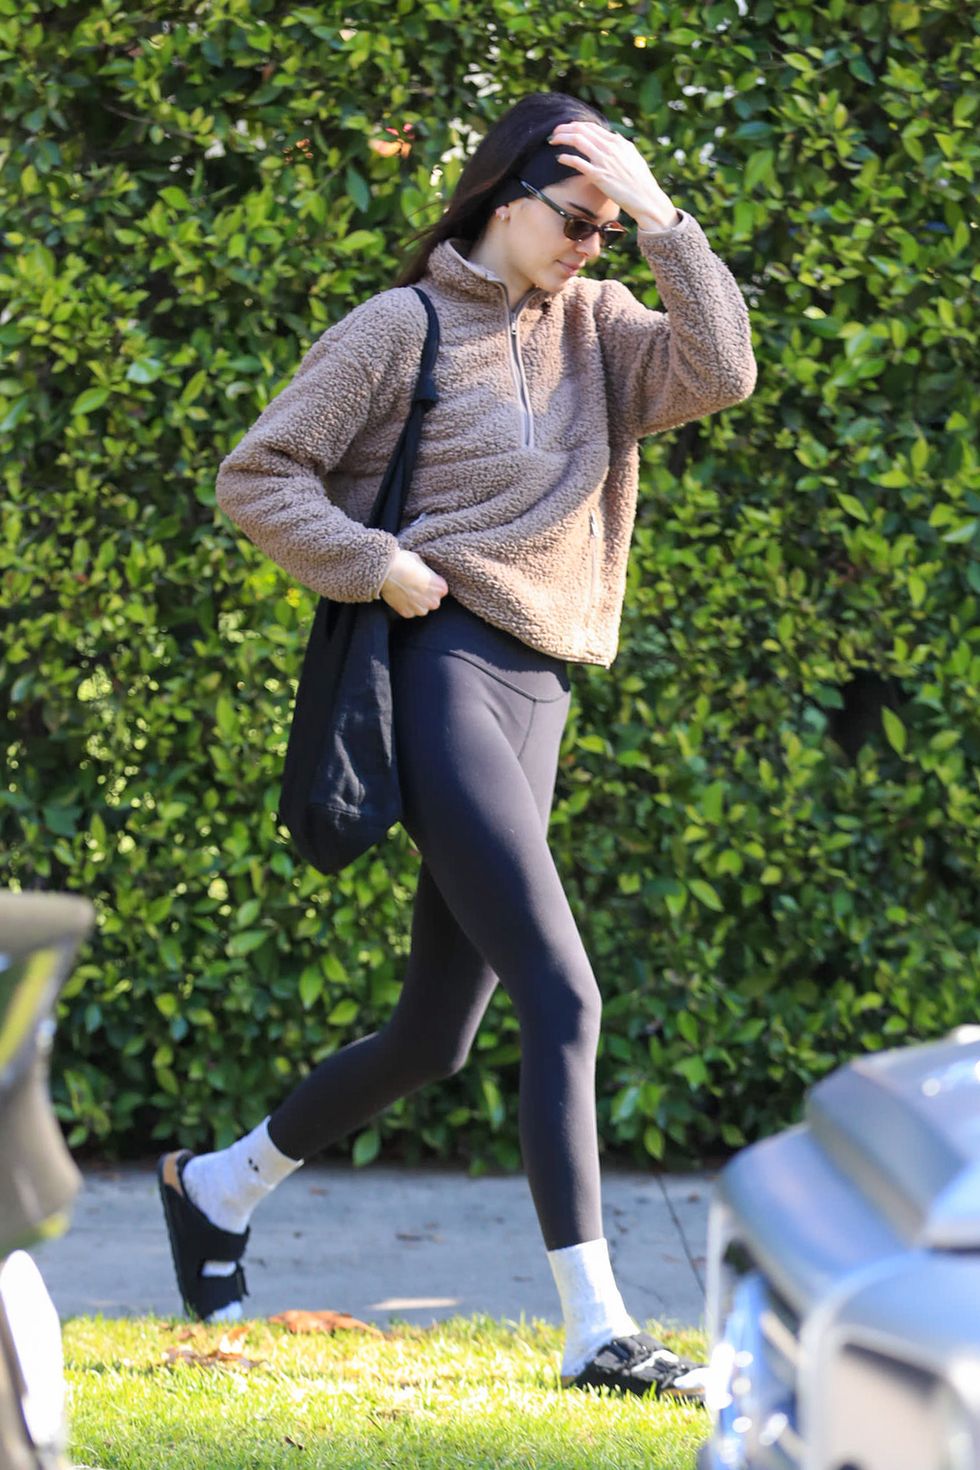 los angeles, ca january 04 kendall jenner is seen on january 04, 2022 in los angeles, california photo by bellocqimagesbauer griffingc images